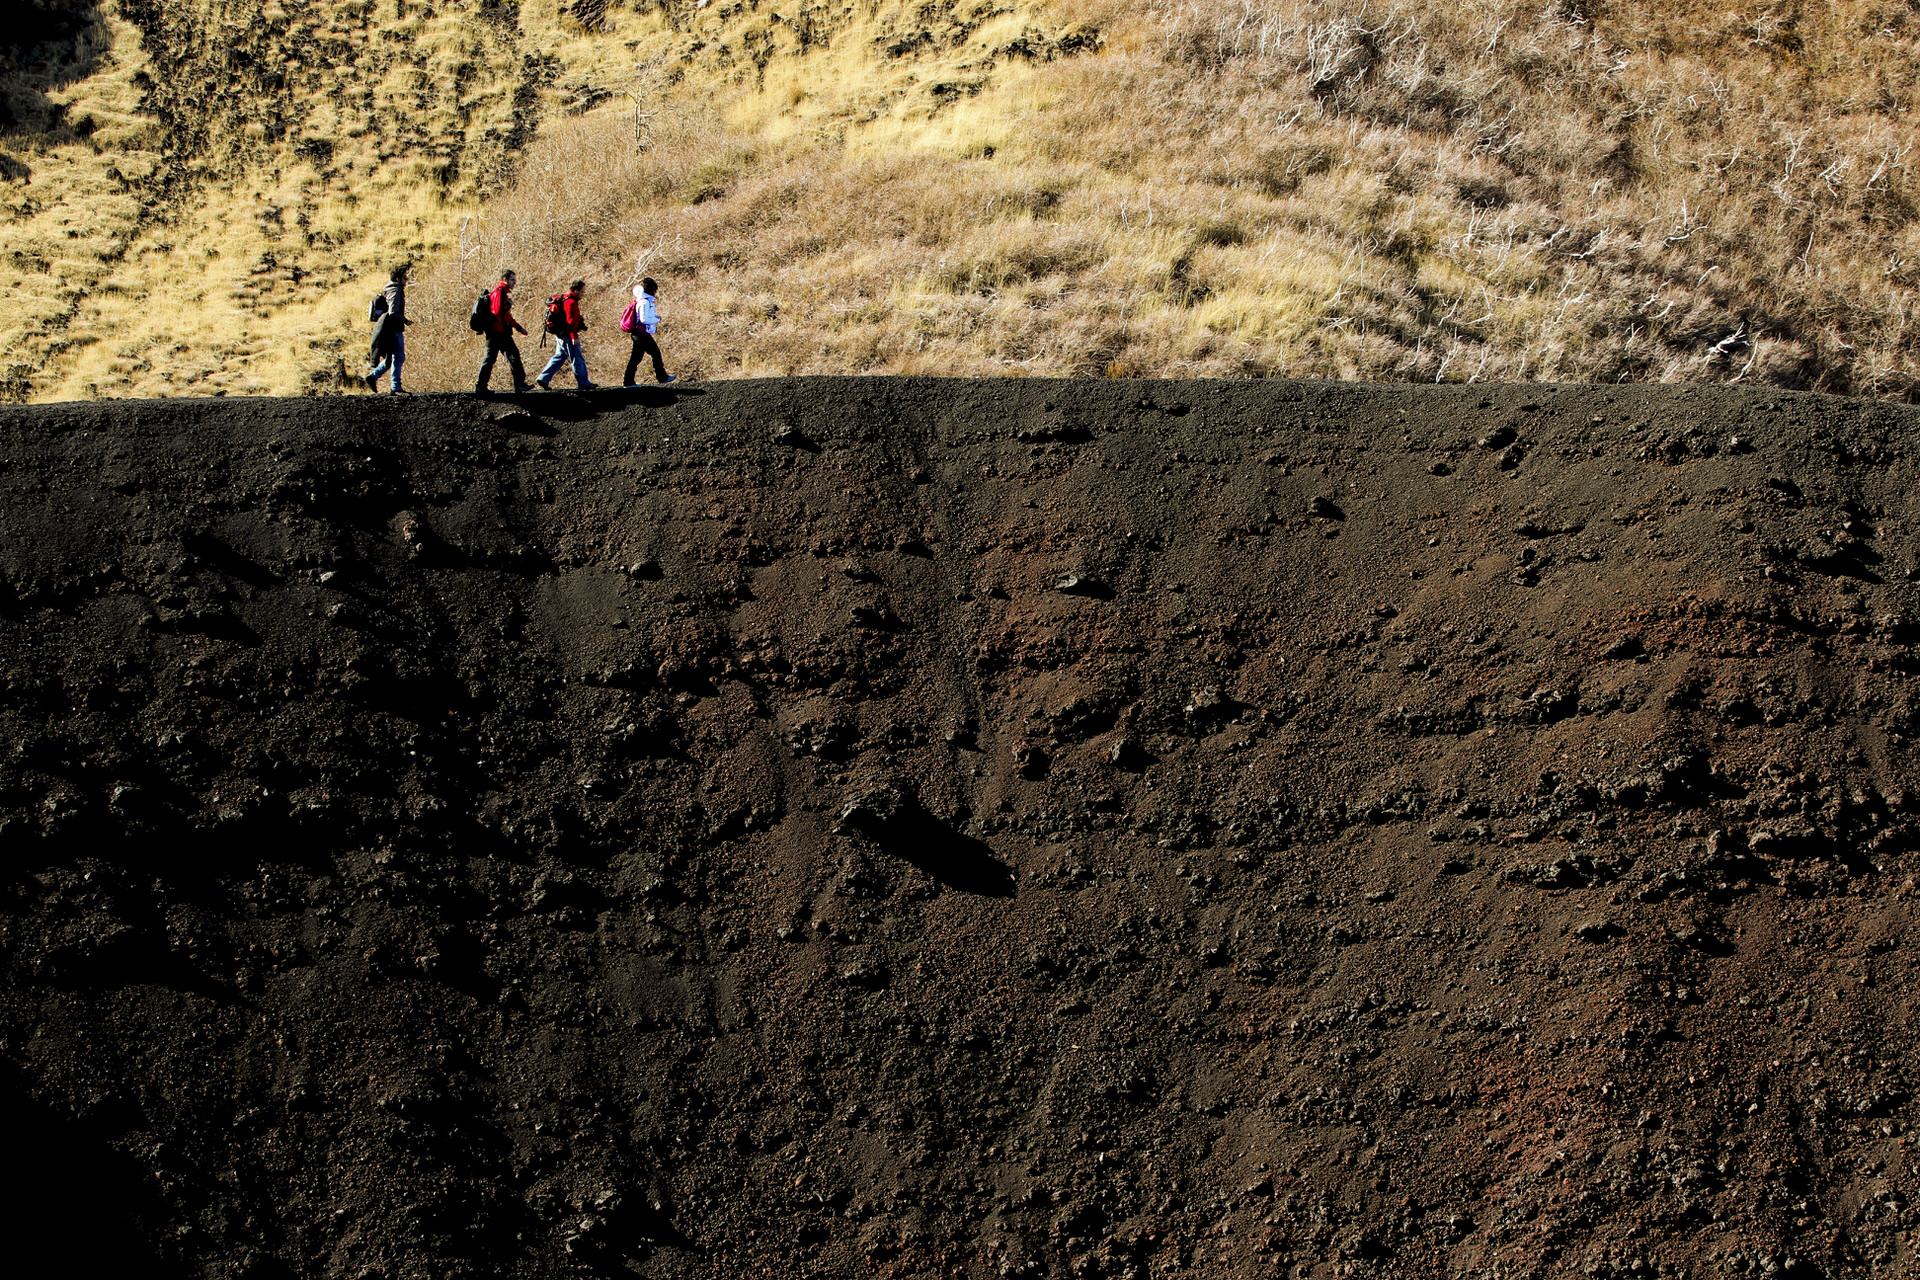 North Craters Tour: Discover huge craters and lava flows